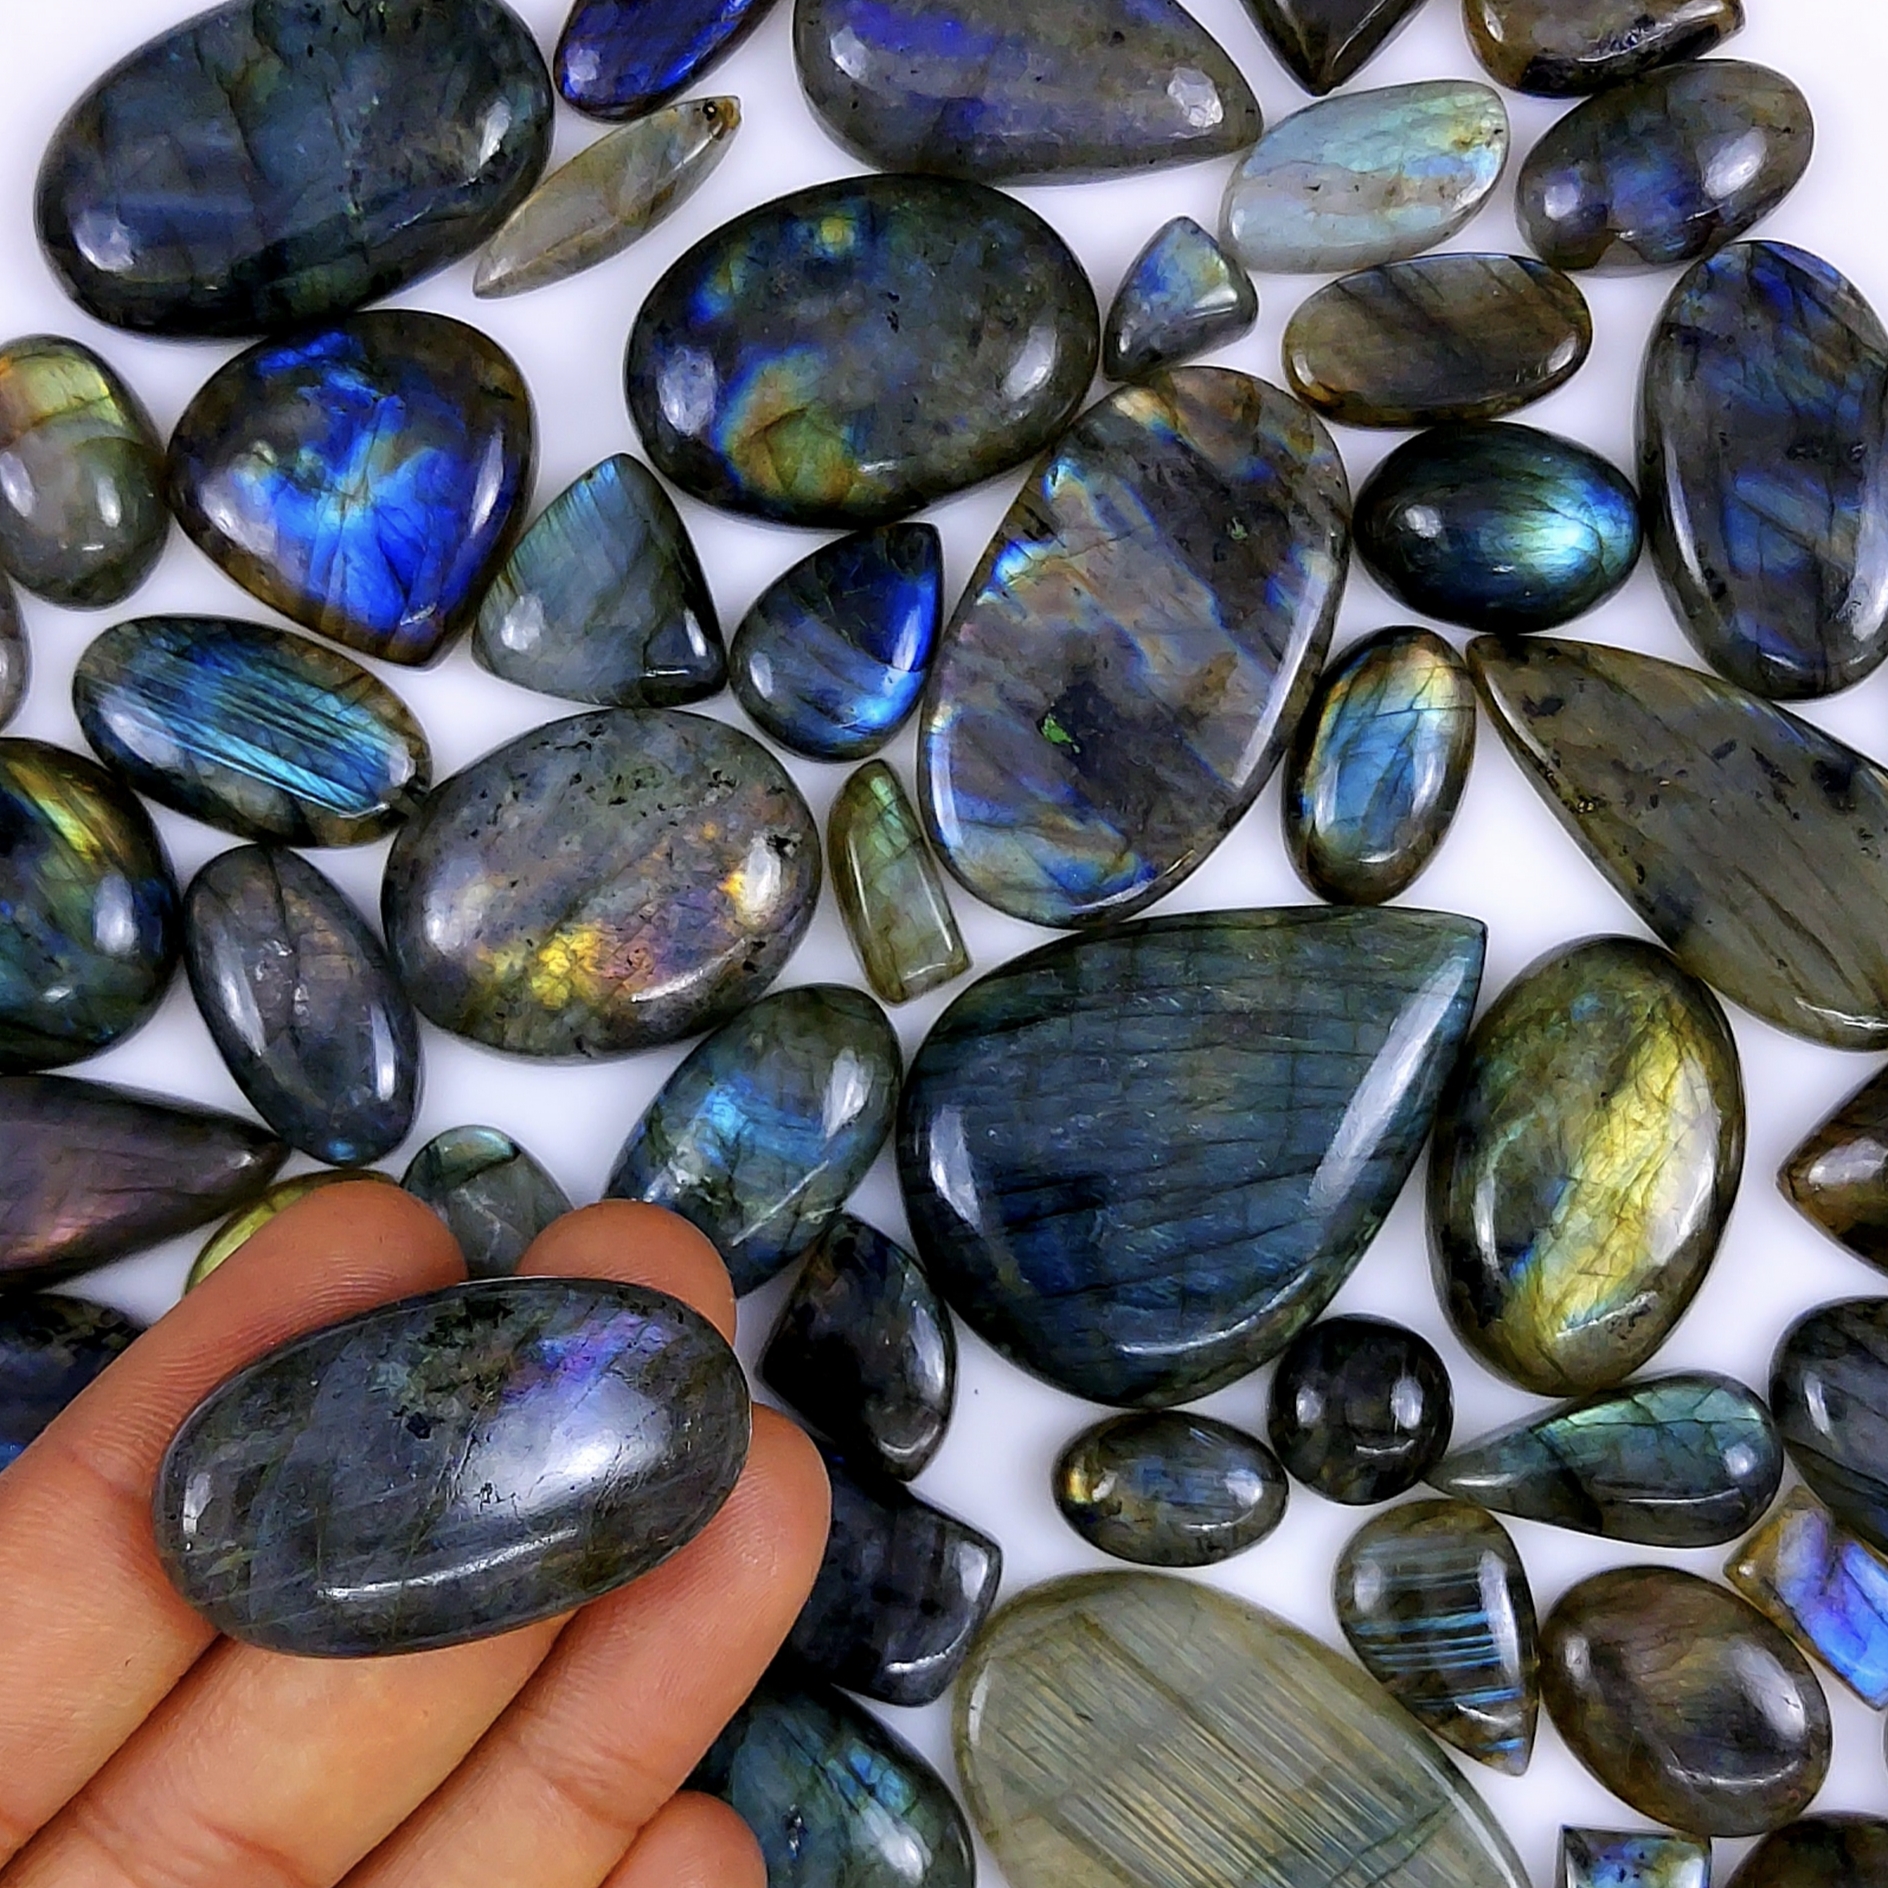 58pc 1786Cts Labradorite Cabochon Multifire Healing Crystal For Jewelry Supplies, Labradorite Necklace Handmade Wire Wrapped Gemstone Pendant 50x35 14x10mm#6257